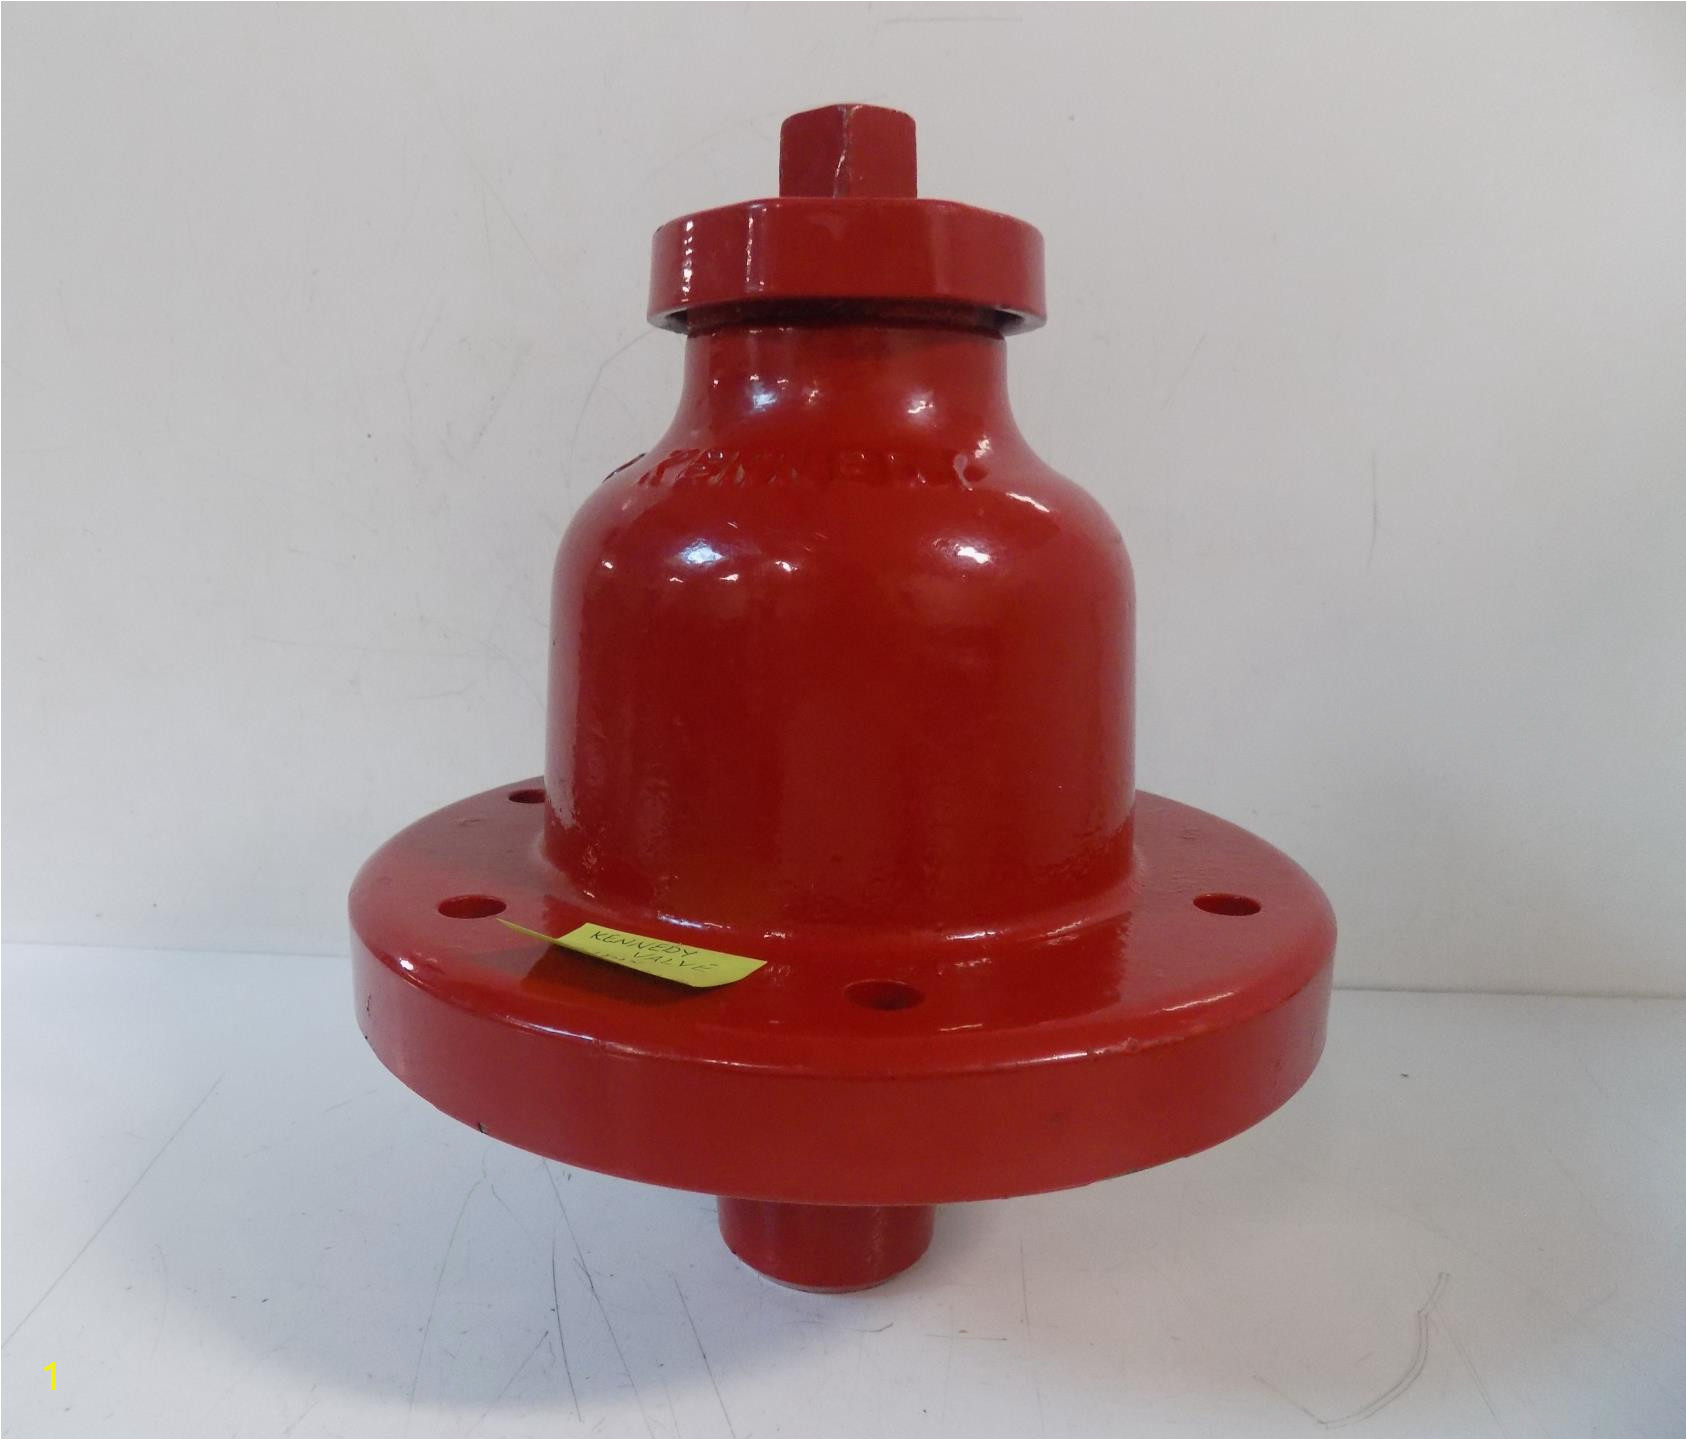 Fire Hydrant Coloring Page Kennedy Valve Fire Hydrant Cap